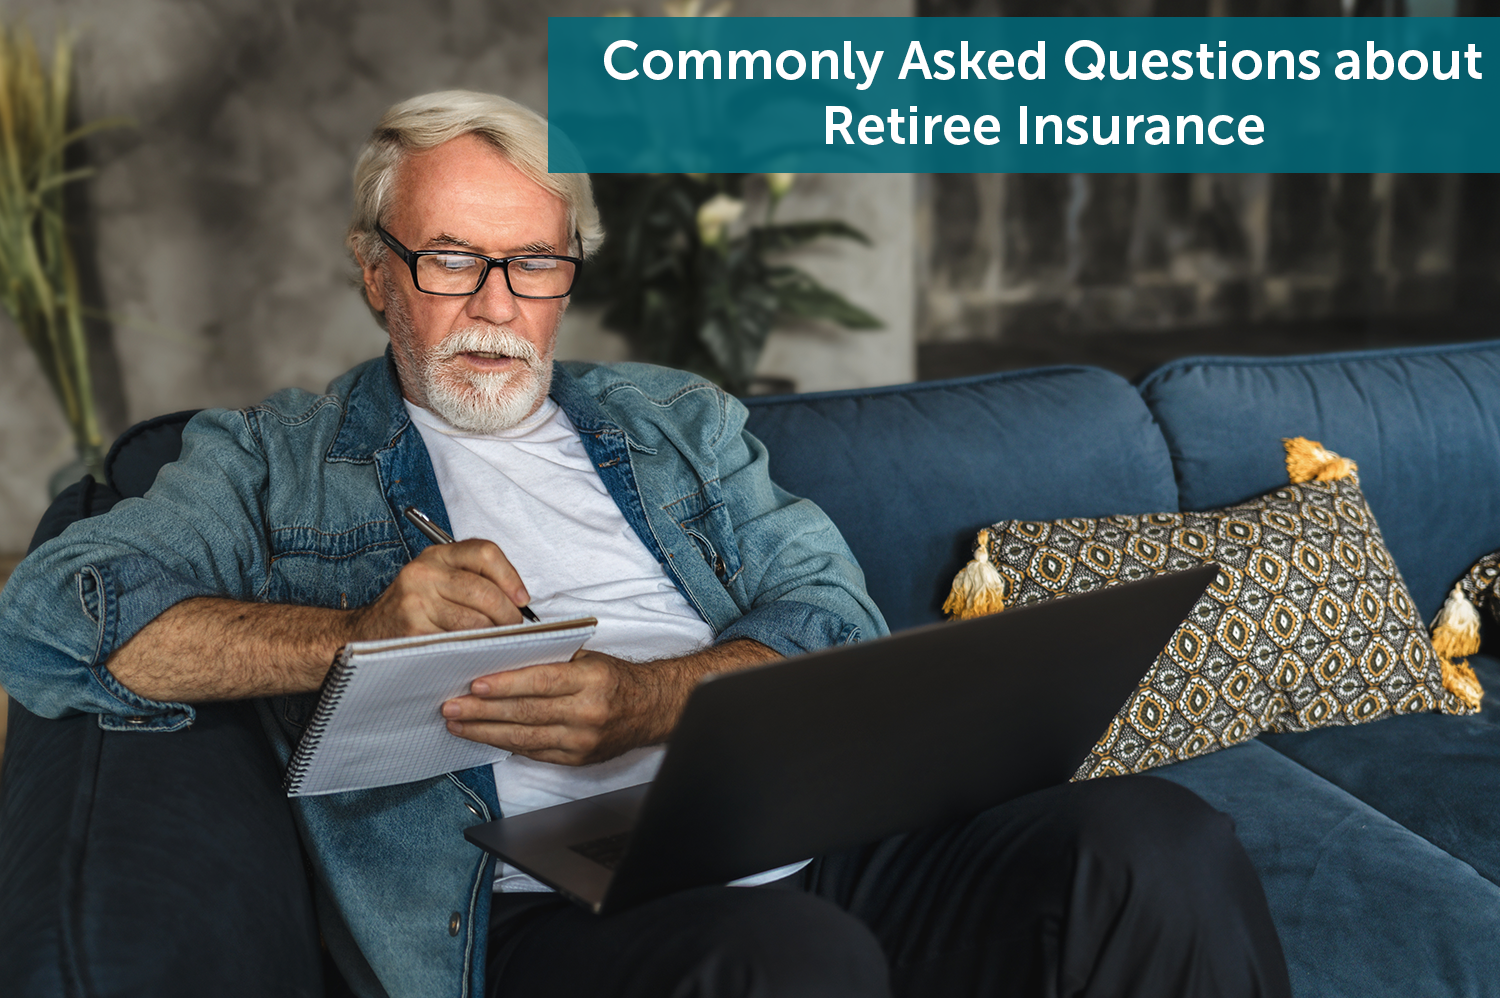 White senior man, sitting on a green couch with a laptop in his lap, writing down retiree insurance questions in a notebook.